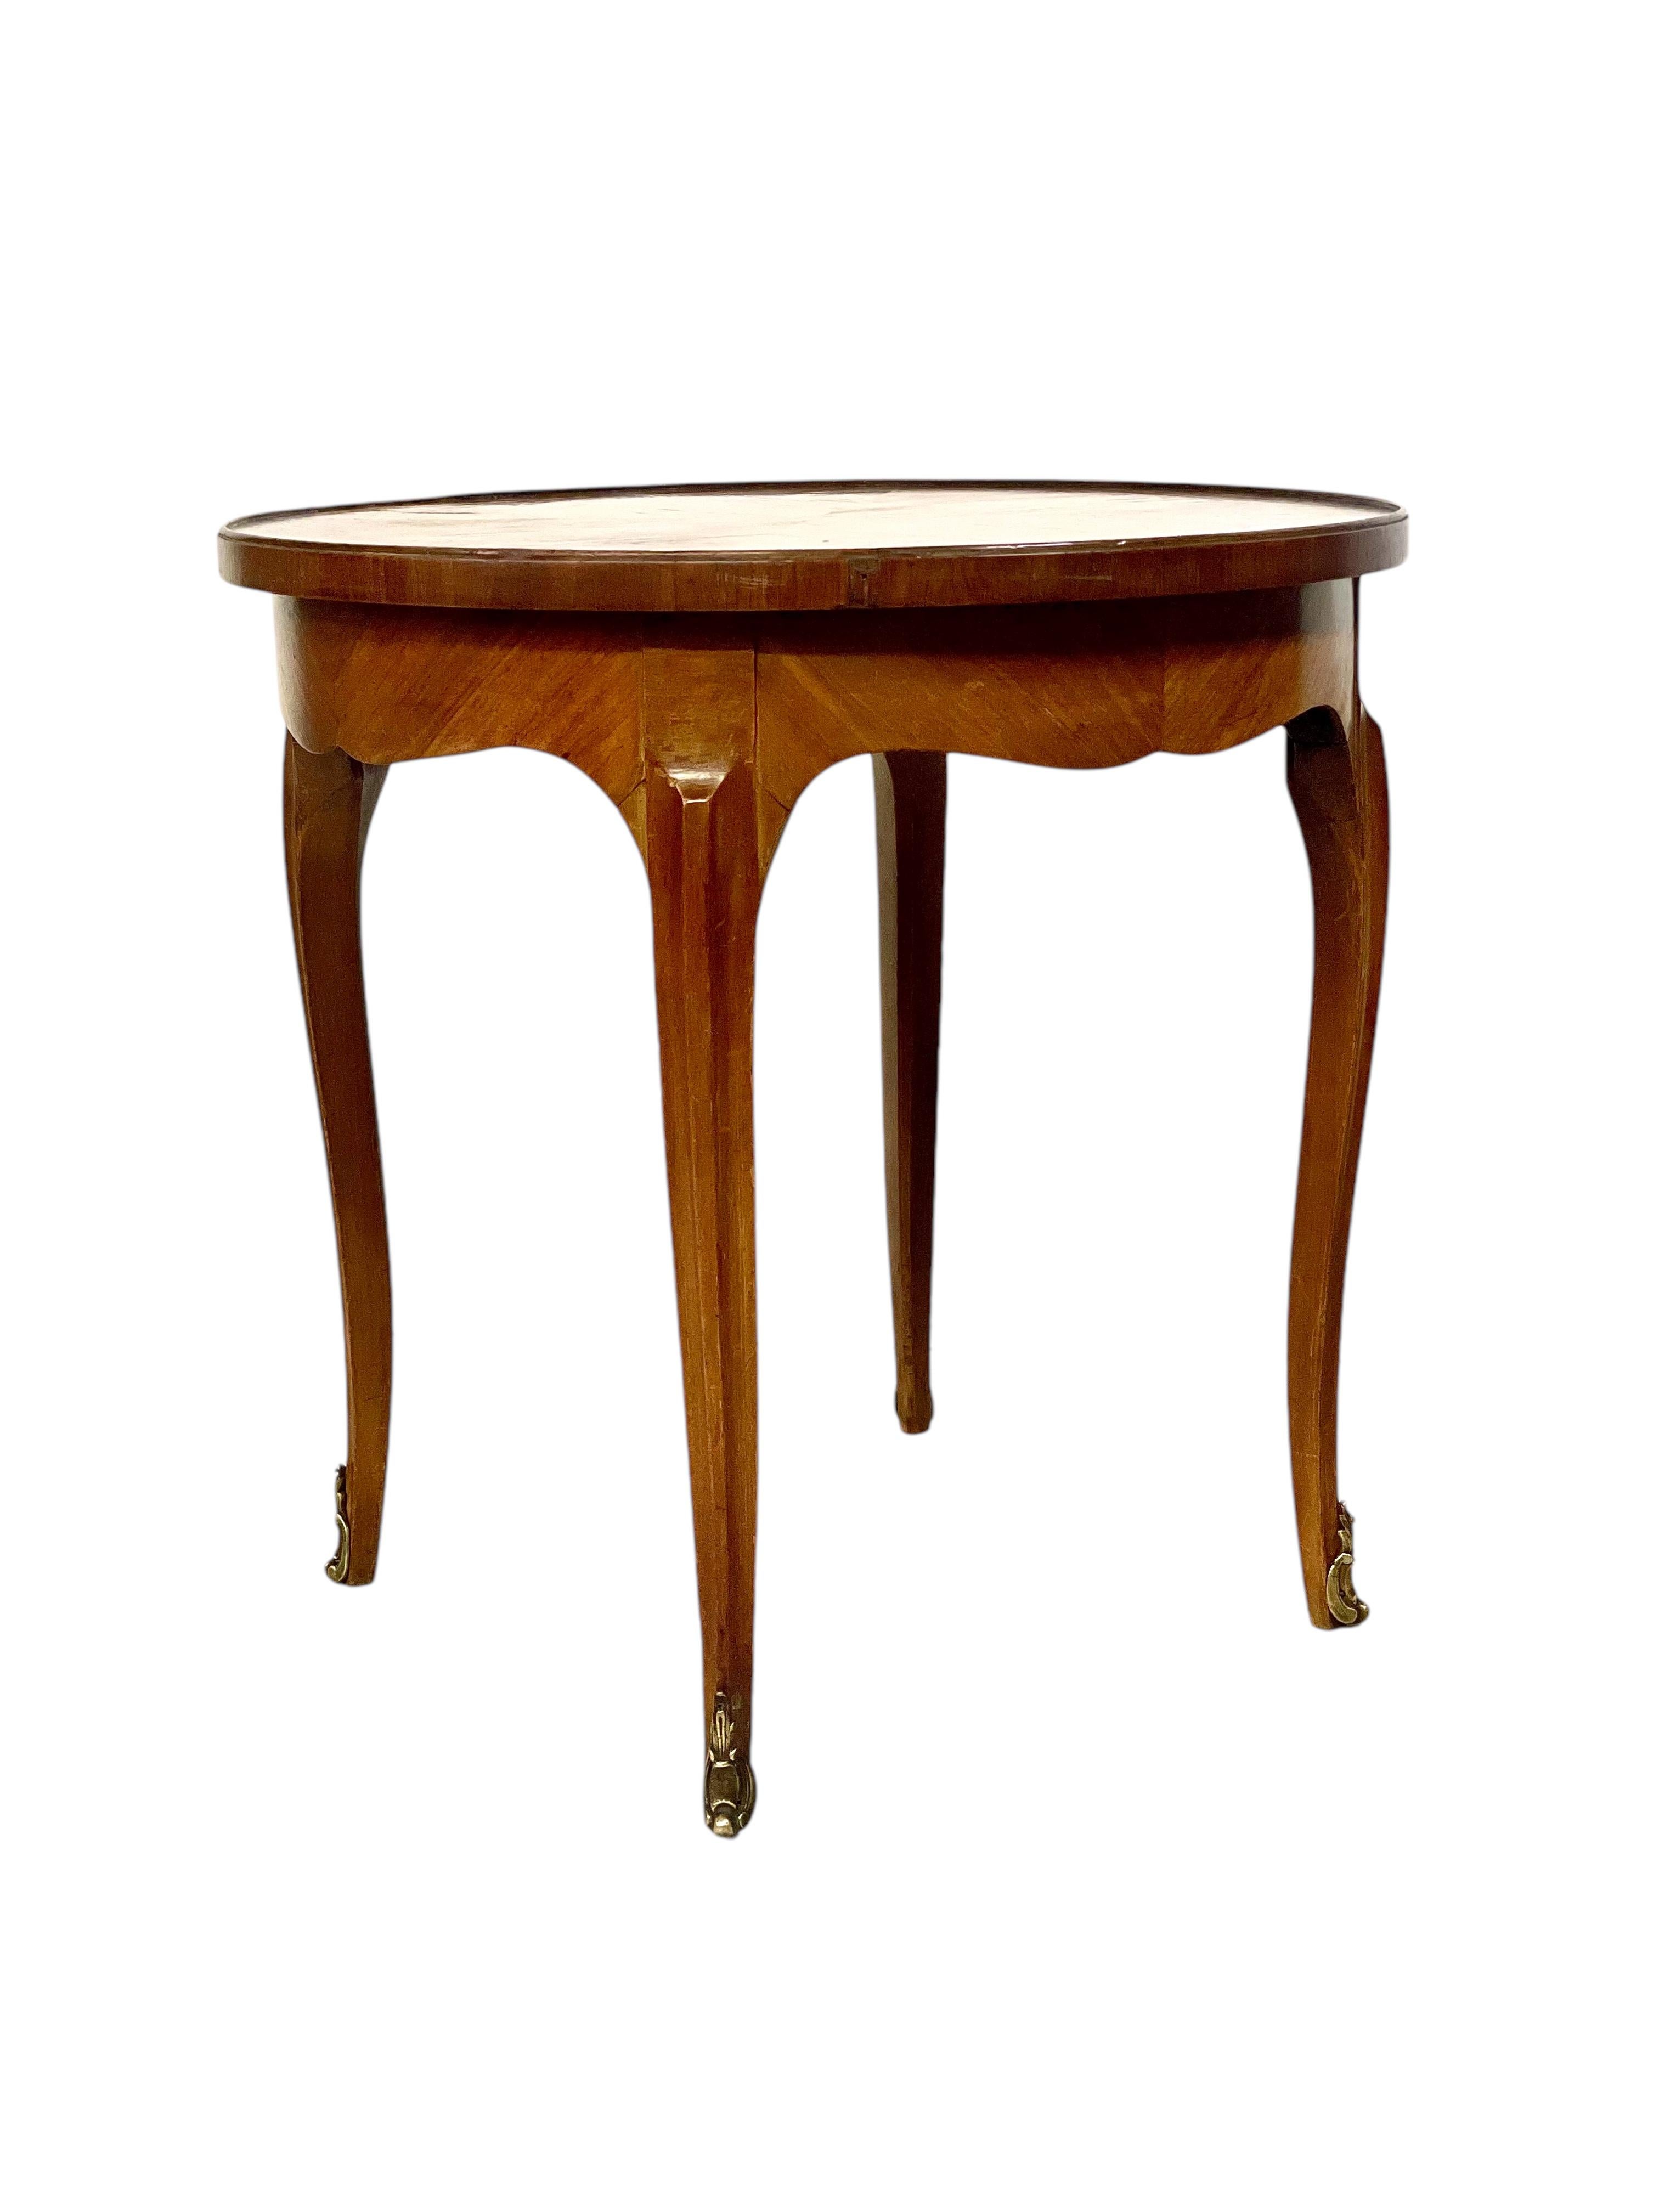 An elegant and very practical French antique salon table in rosewood veneer, dating from around the 1930s, and featuring a simple but effective marquetry decoration. The polished, circular top is quarter-veneered with a wide border, while the apron